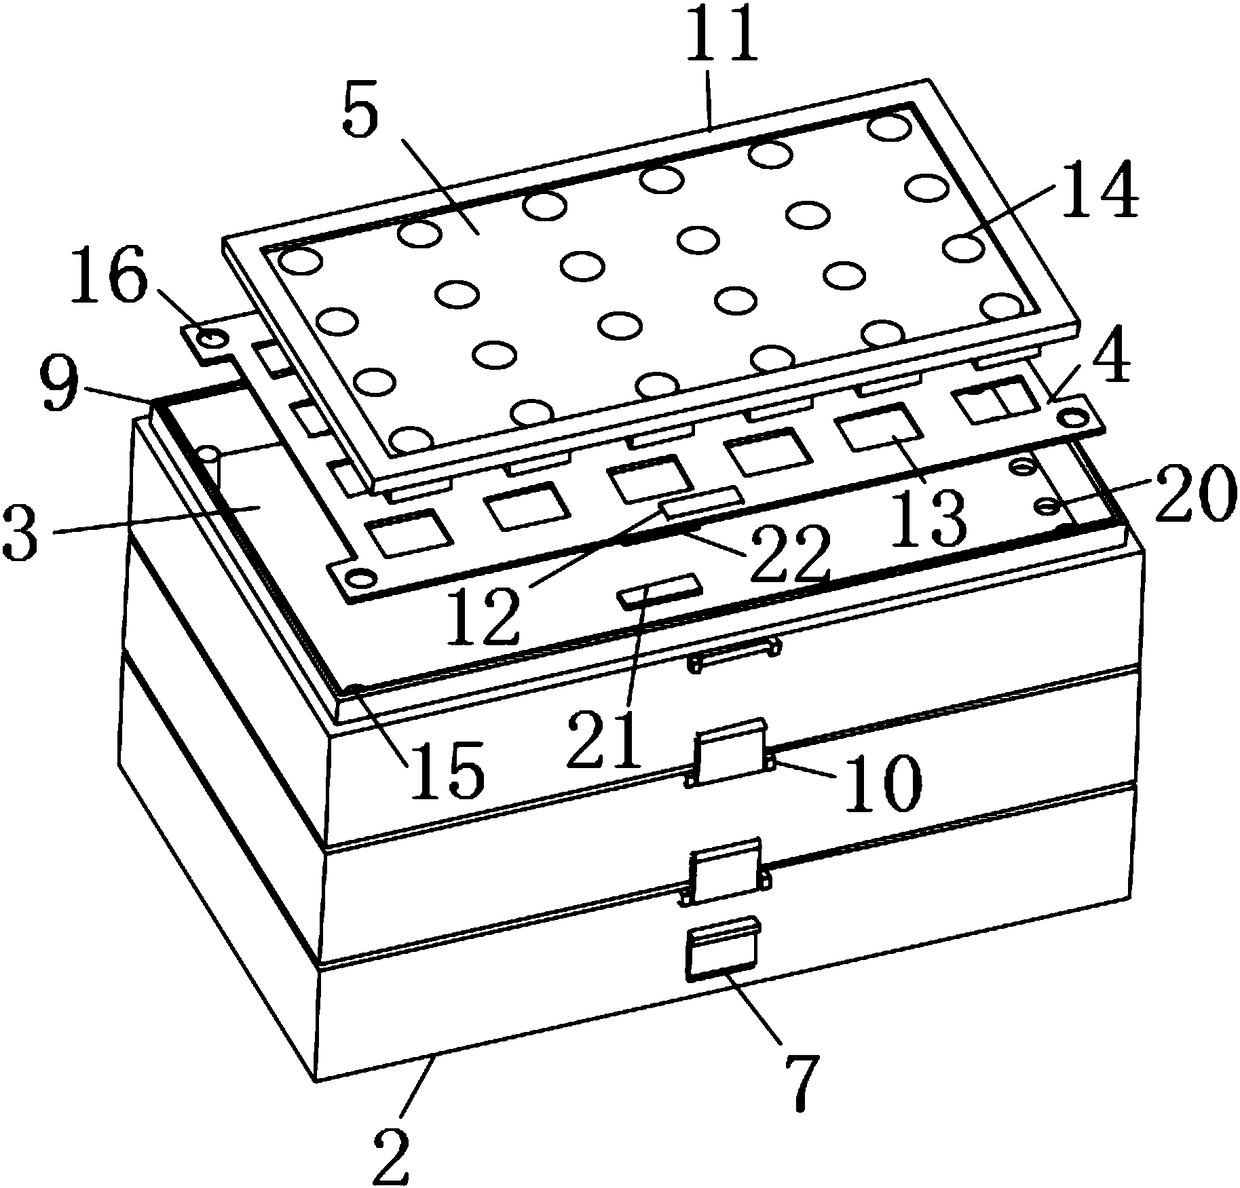 Multi-functional box body for packaging inflammable and brittle materials